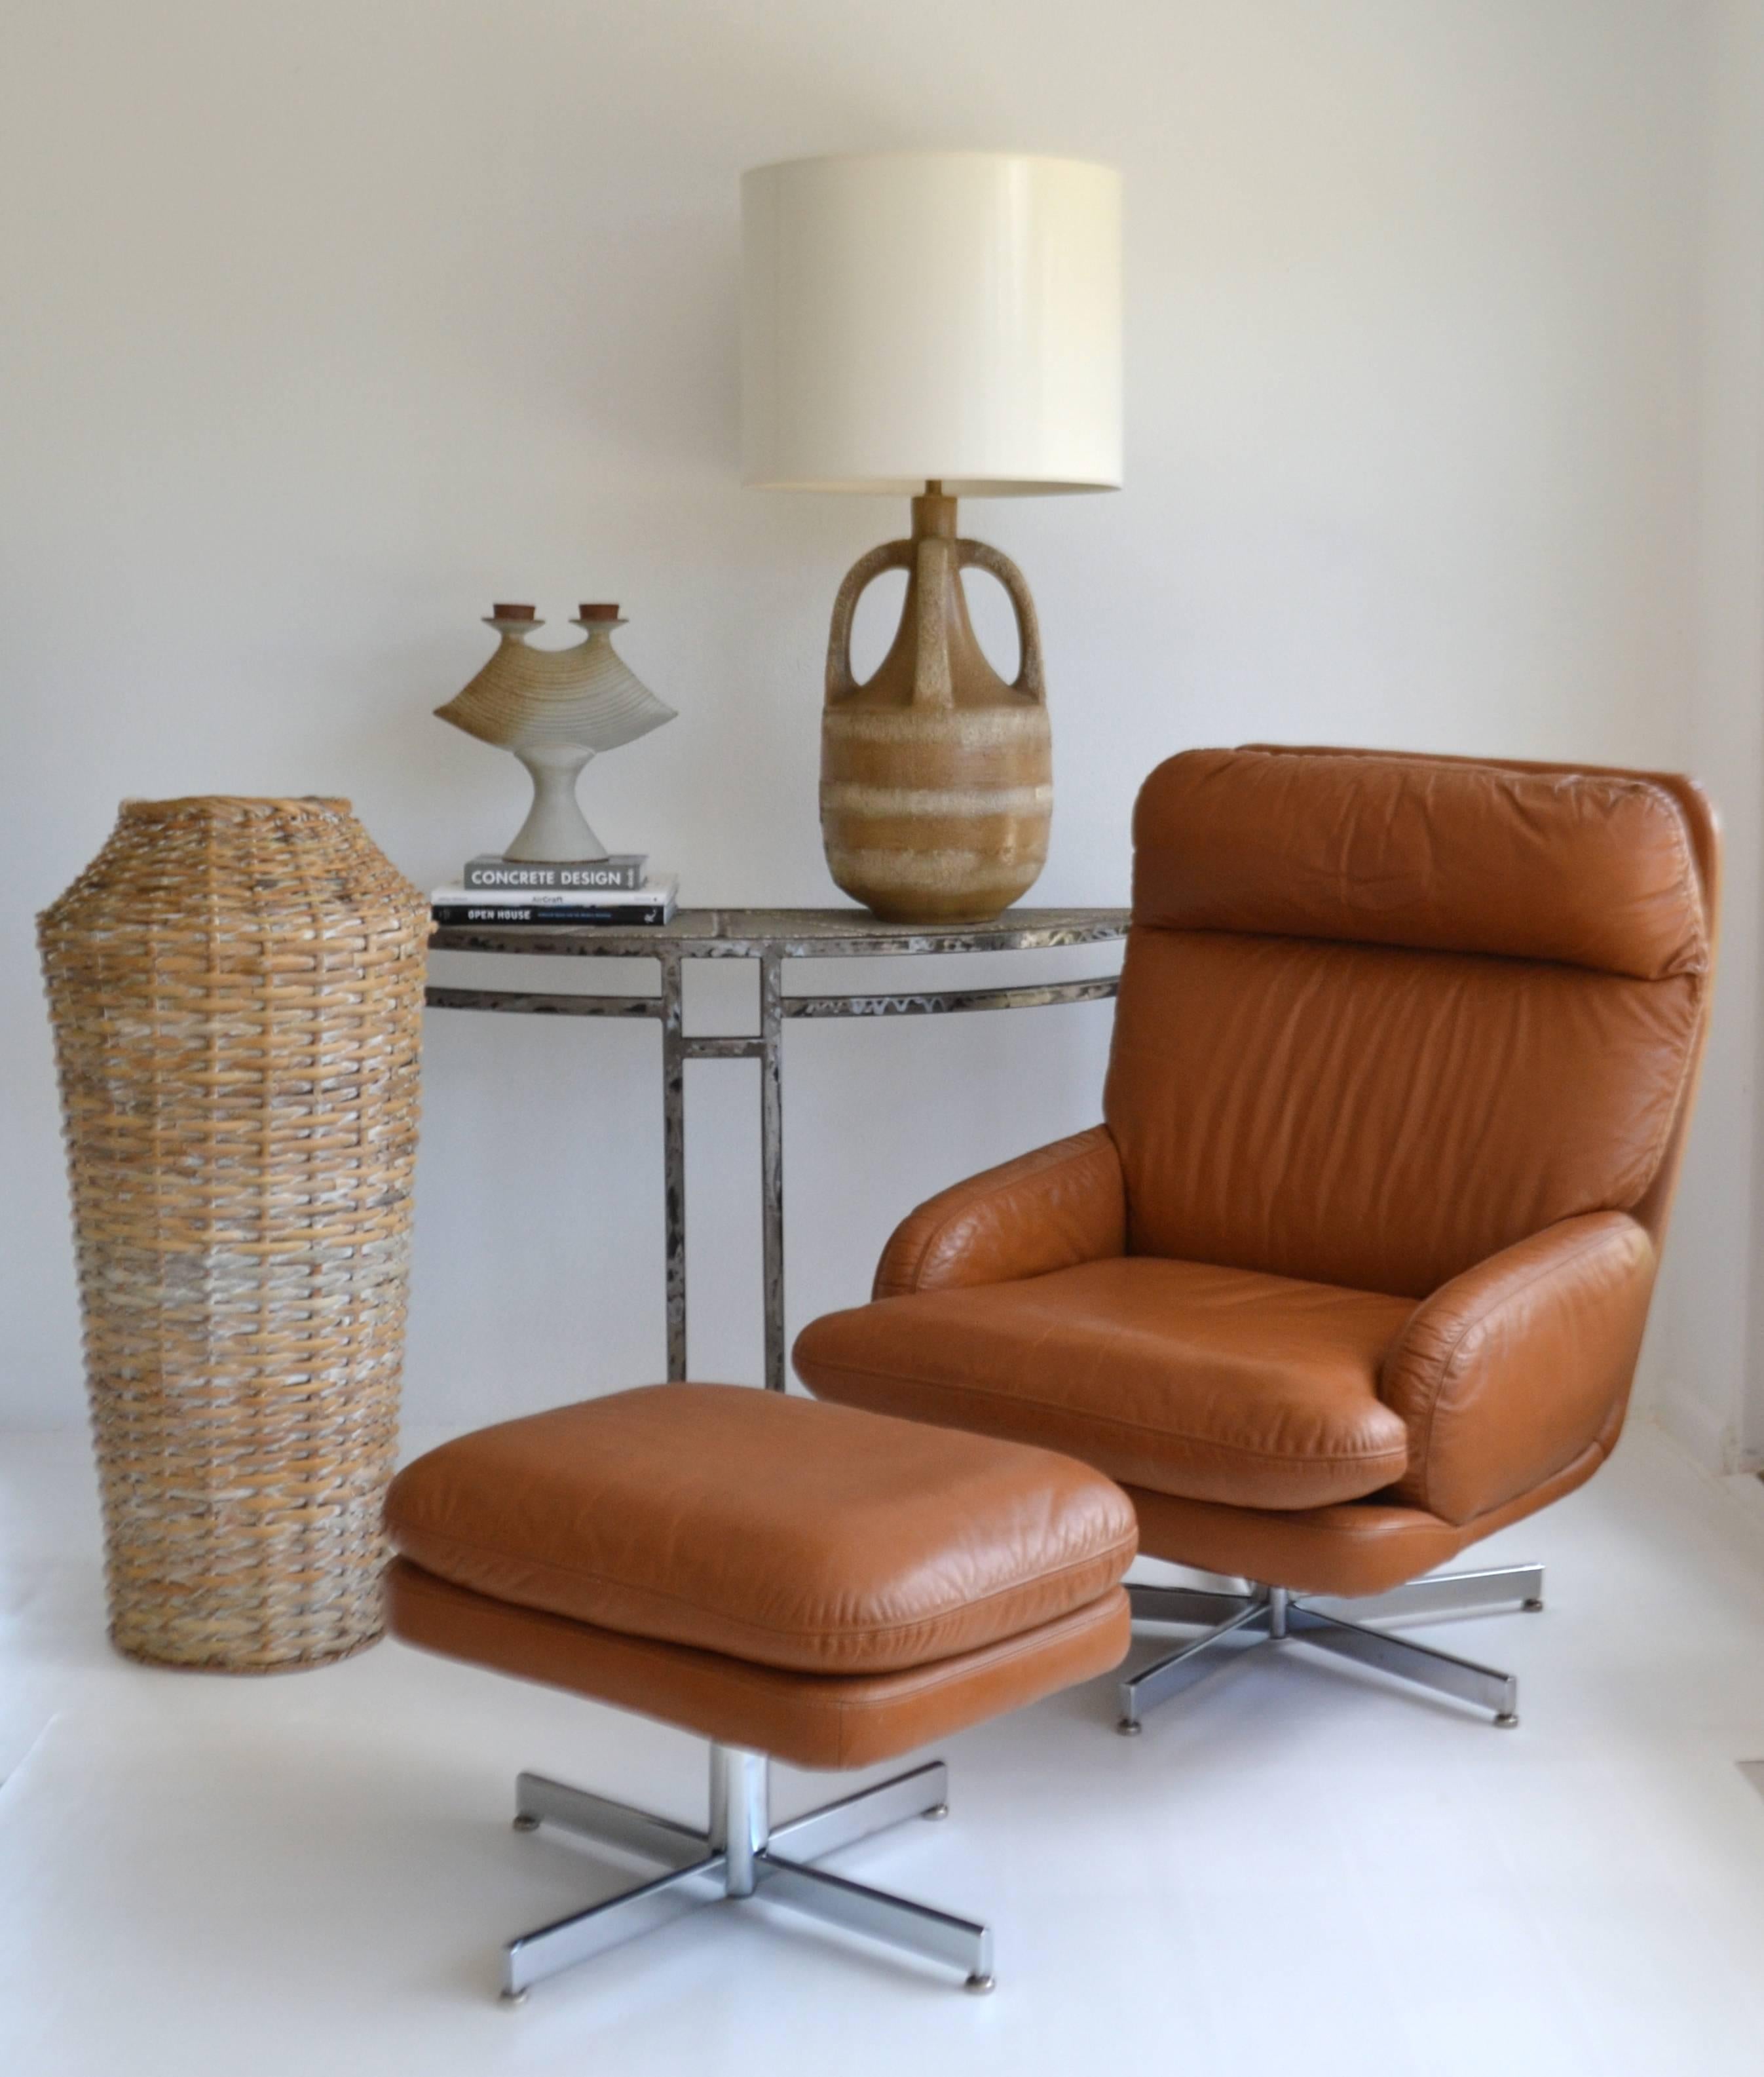 Striking Mid-Century leather lounge chair and ottoman by Directional, circa 1960s - 1970s. This handsome club chair and accompanying stool are designed to swivel and are upholstered in the original brown leather upholstery with hand stitched